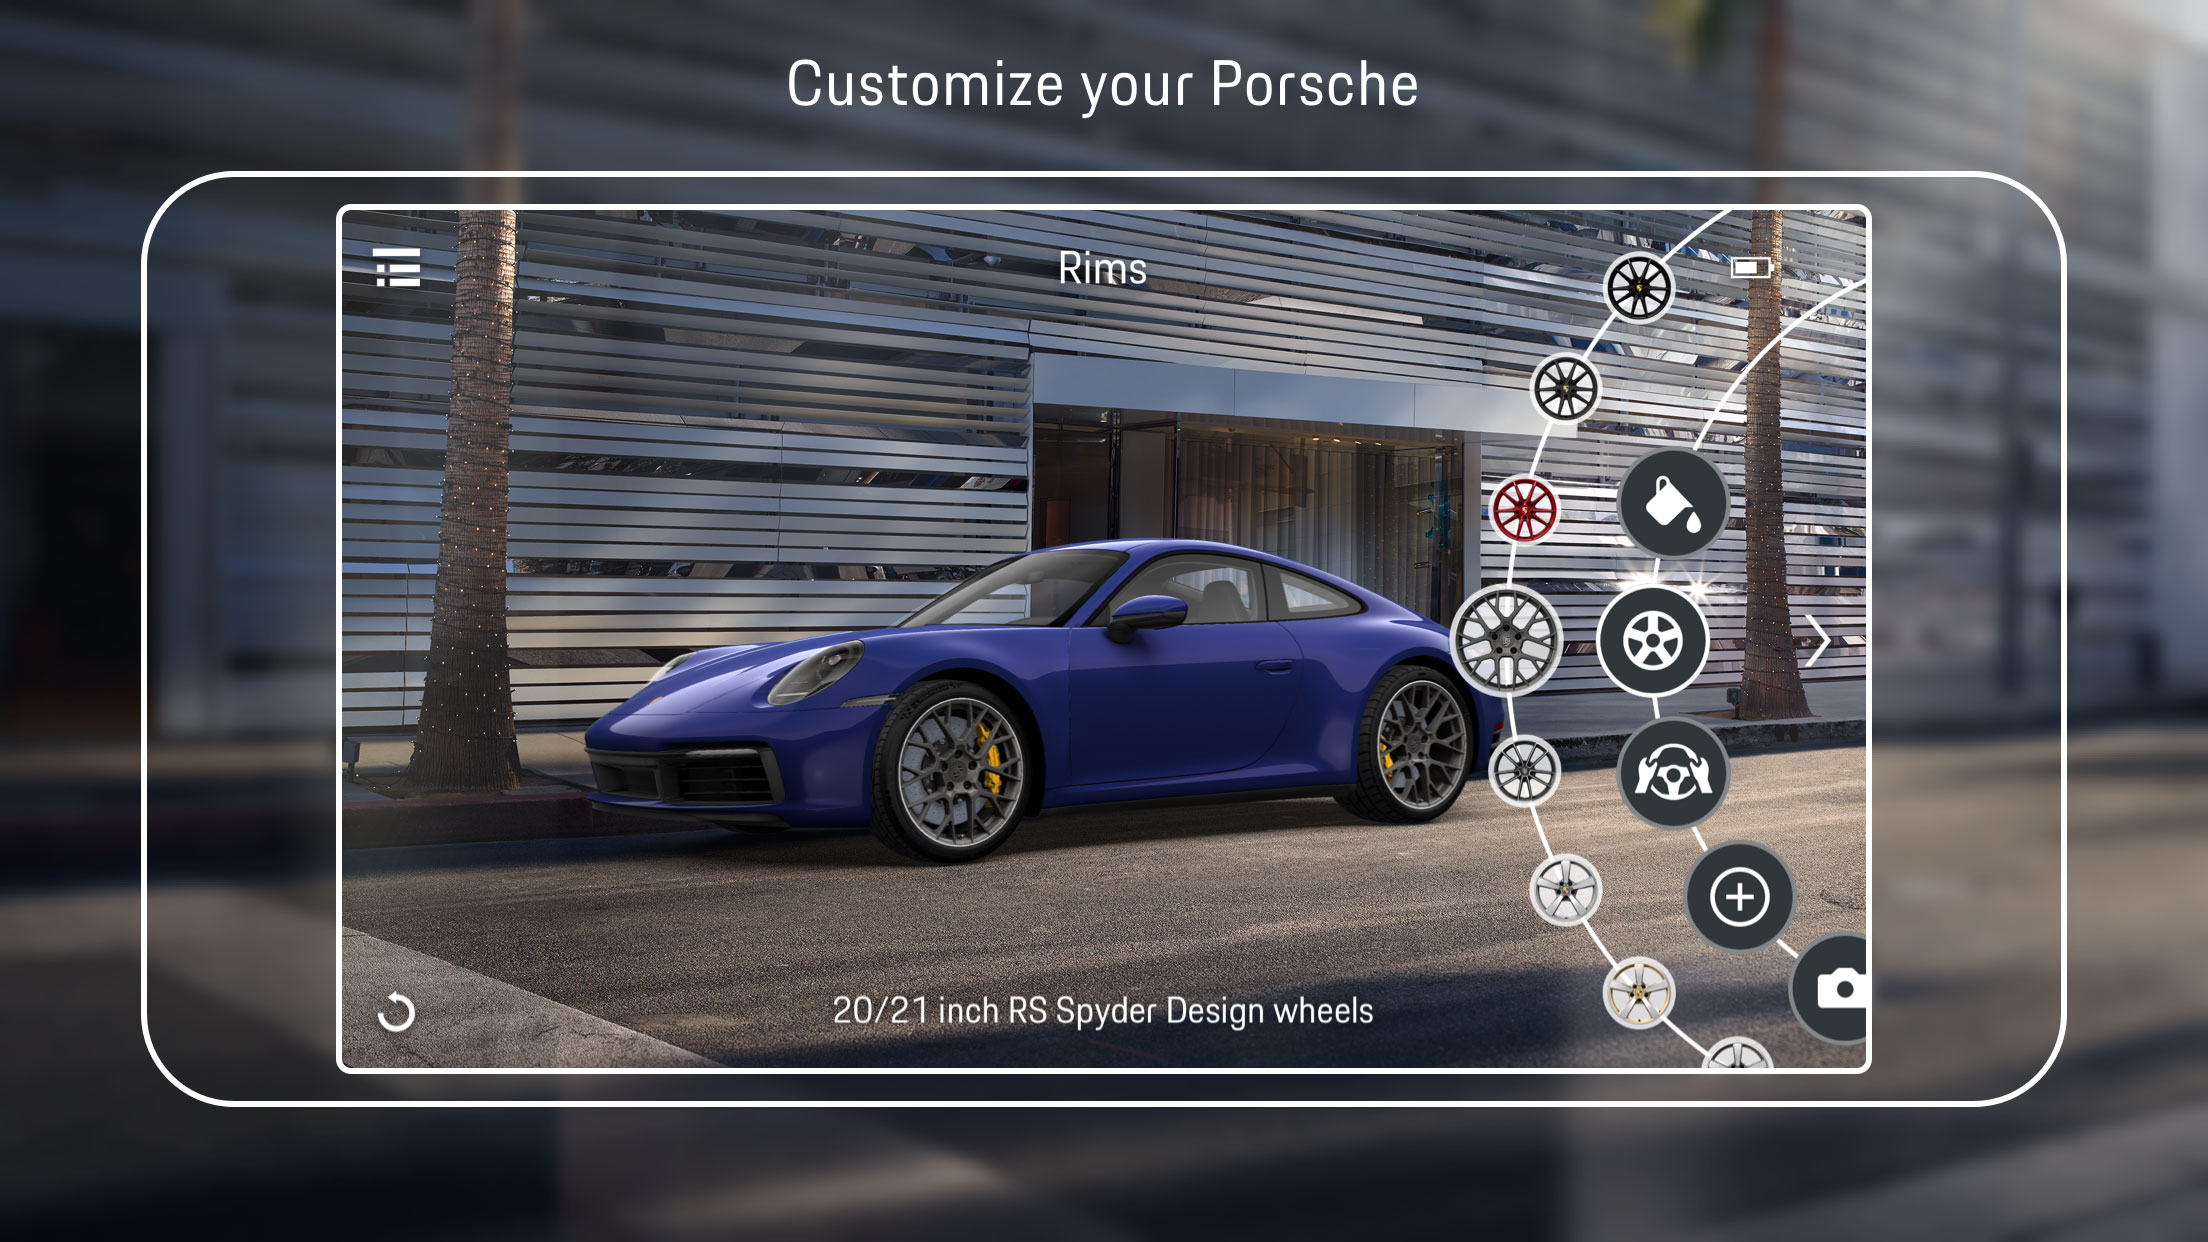 Using the Porsche Code,customers can upload their configuration from the Web Configurator into the app